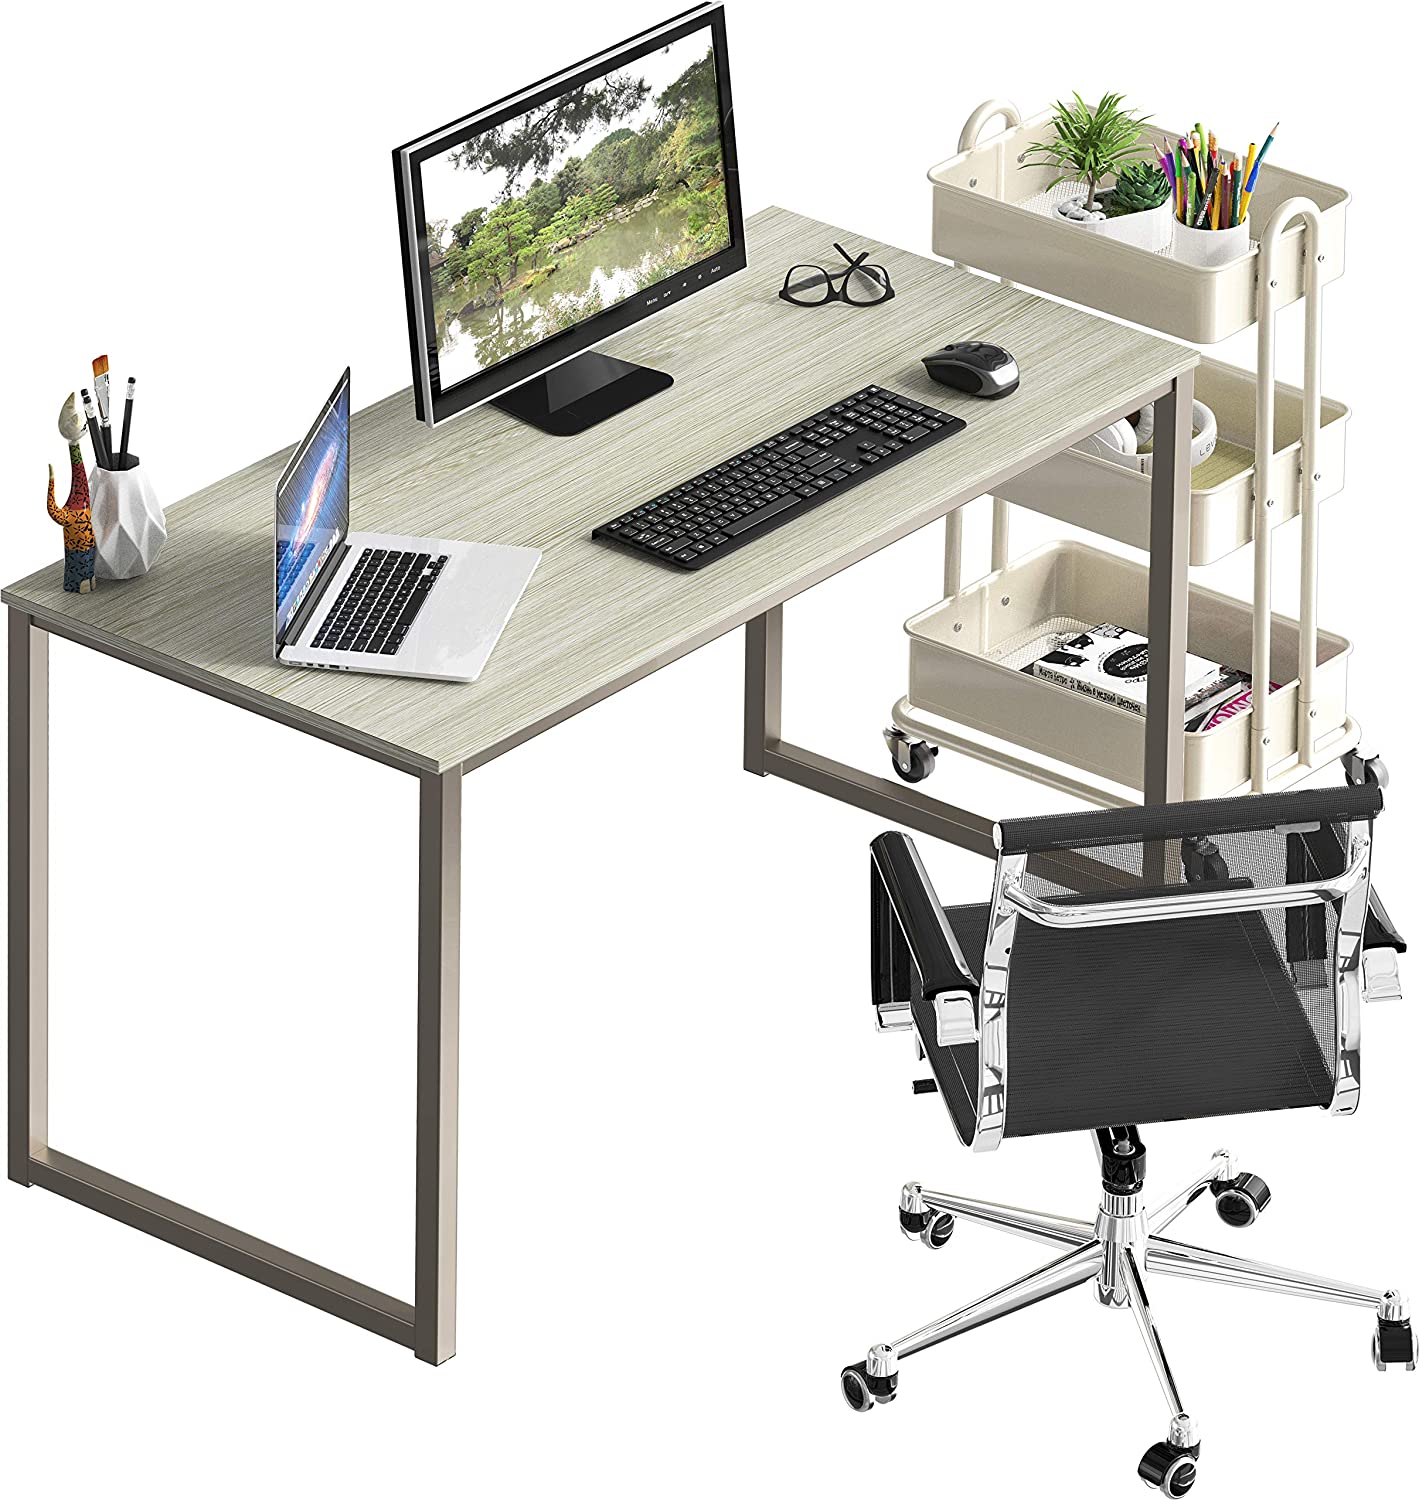 SHW Home Office 40-Inch Computer Desk, Maple - image 4 of 6